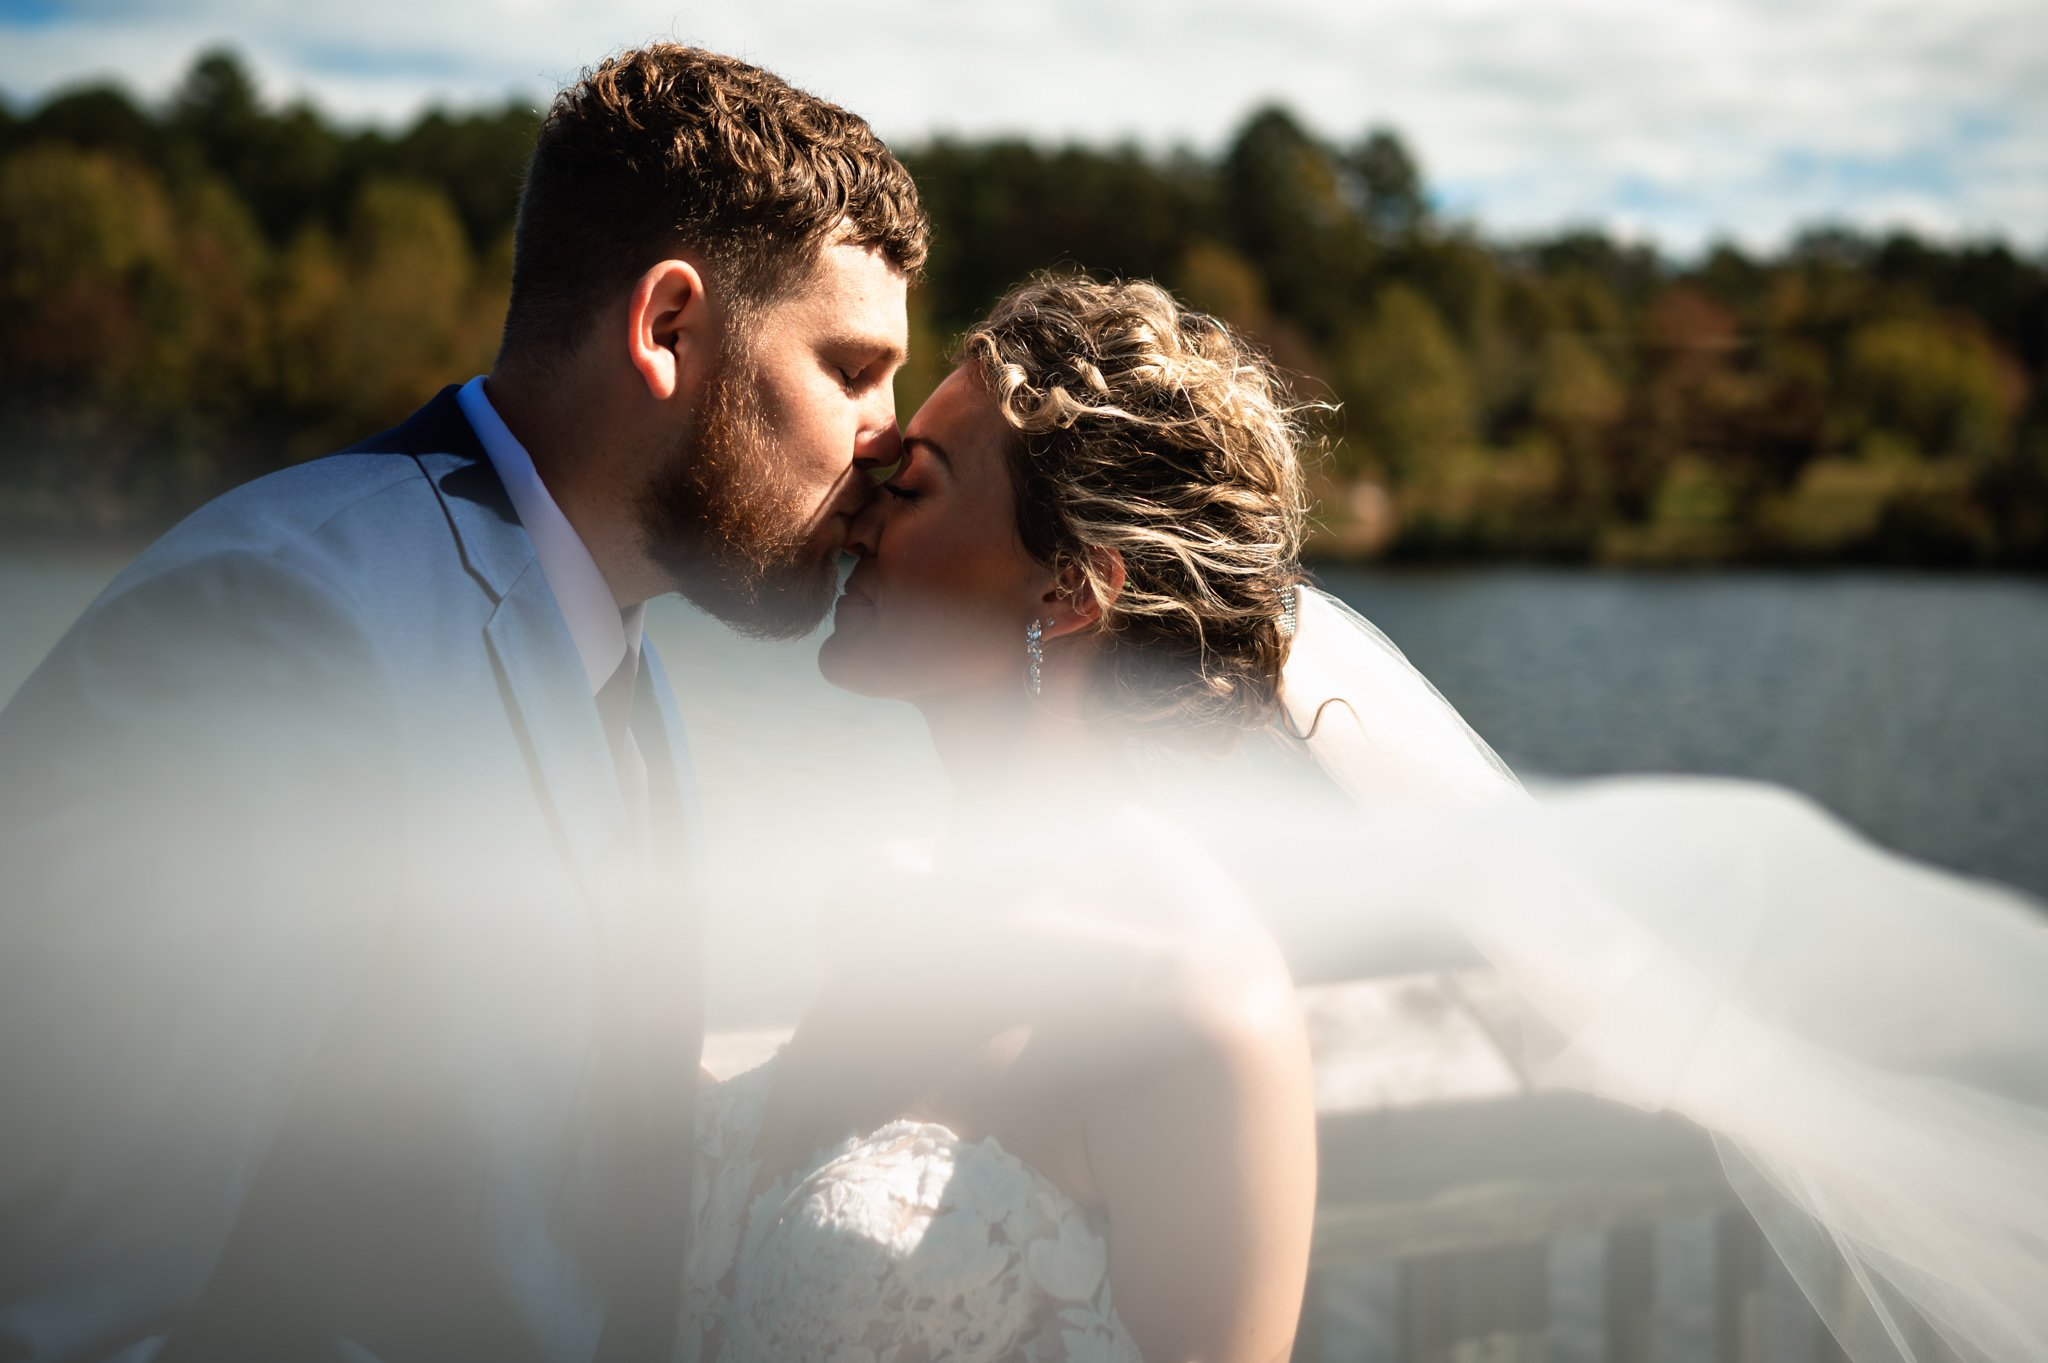 An enchanting Asheville, NC wedding photographer captures a breathtaking moment as a radiant bride and beaming groom share an intimate kiss against the backdrop of a serene lake.